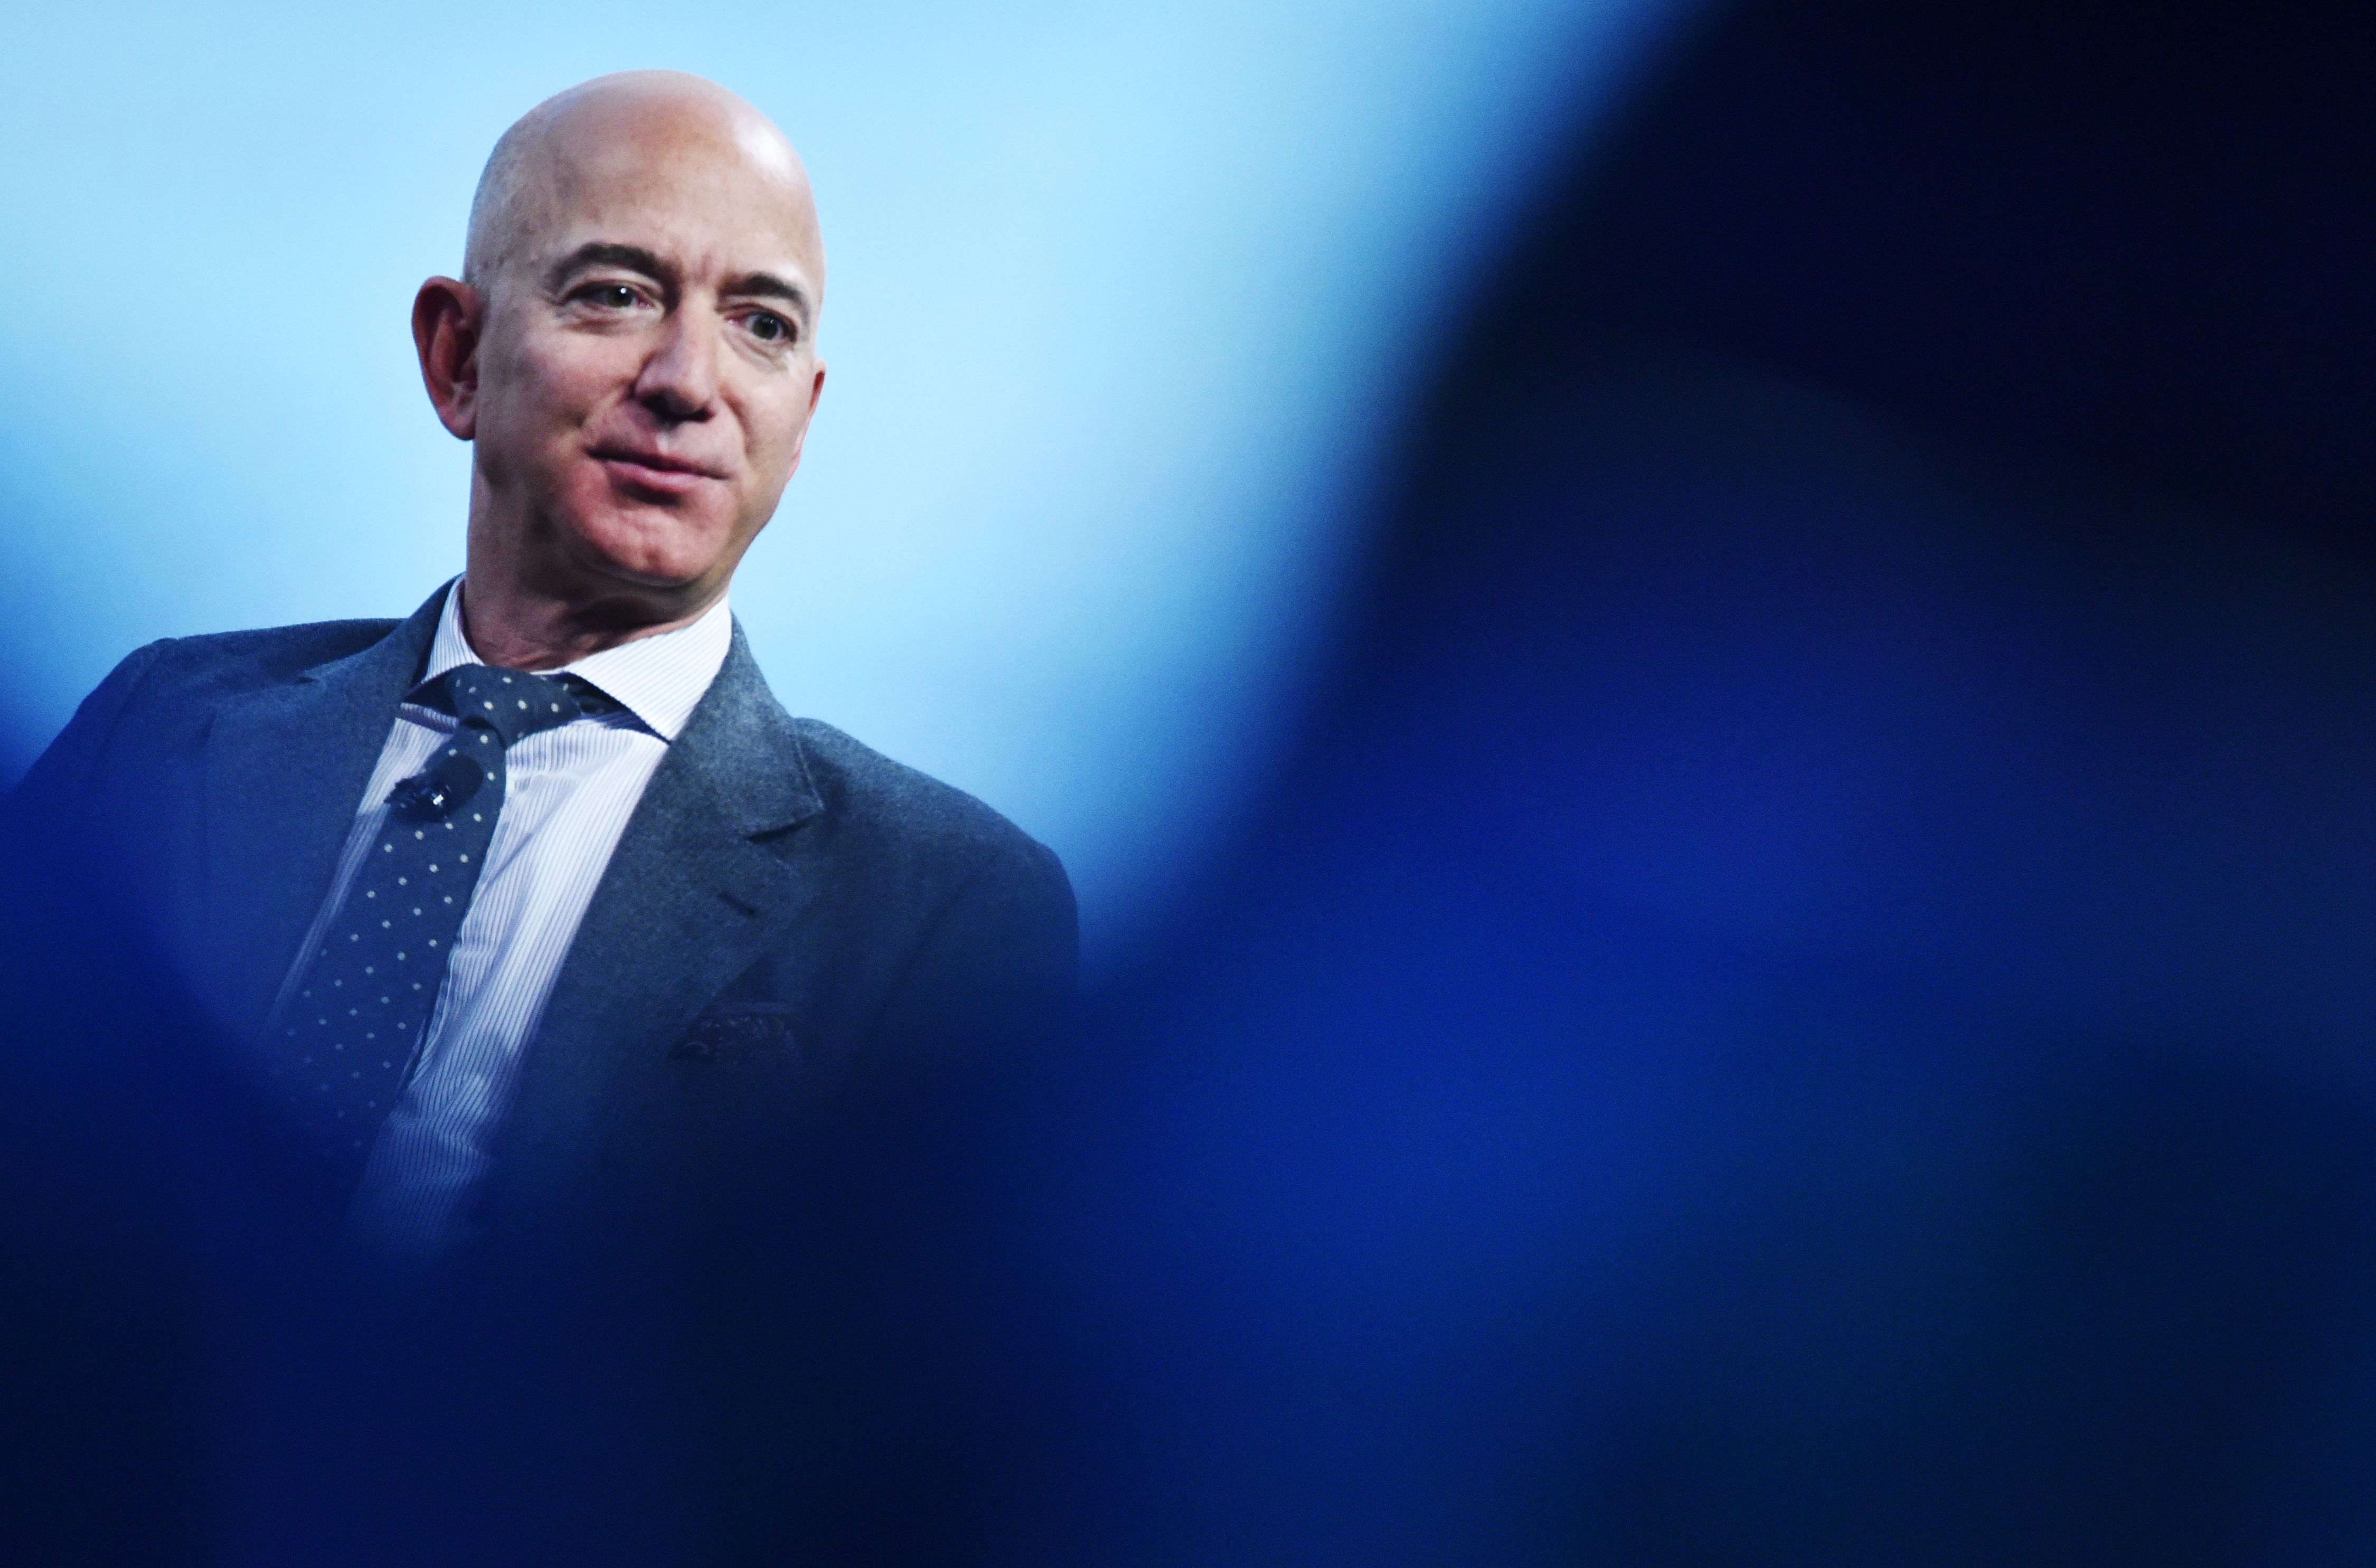 Jeff Bezos will step down as Amazon CEO on July 5th